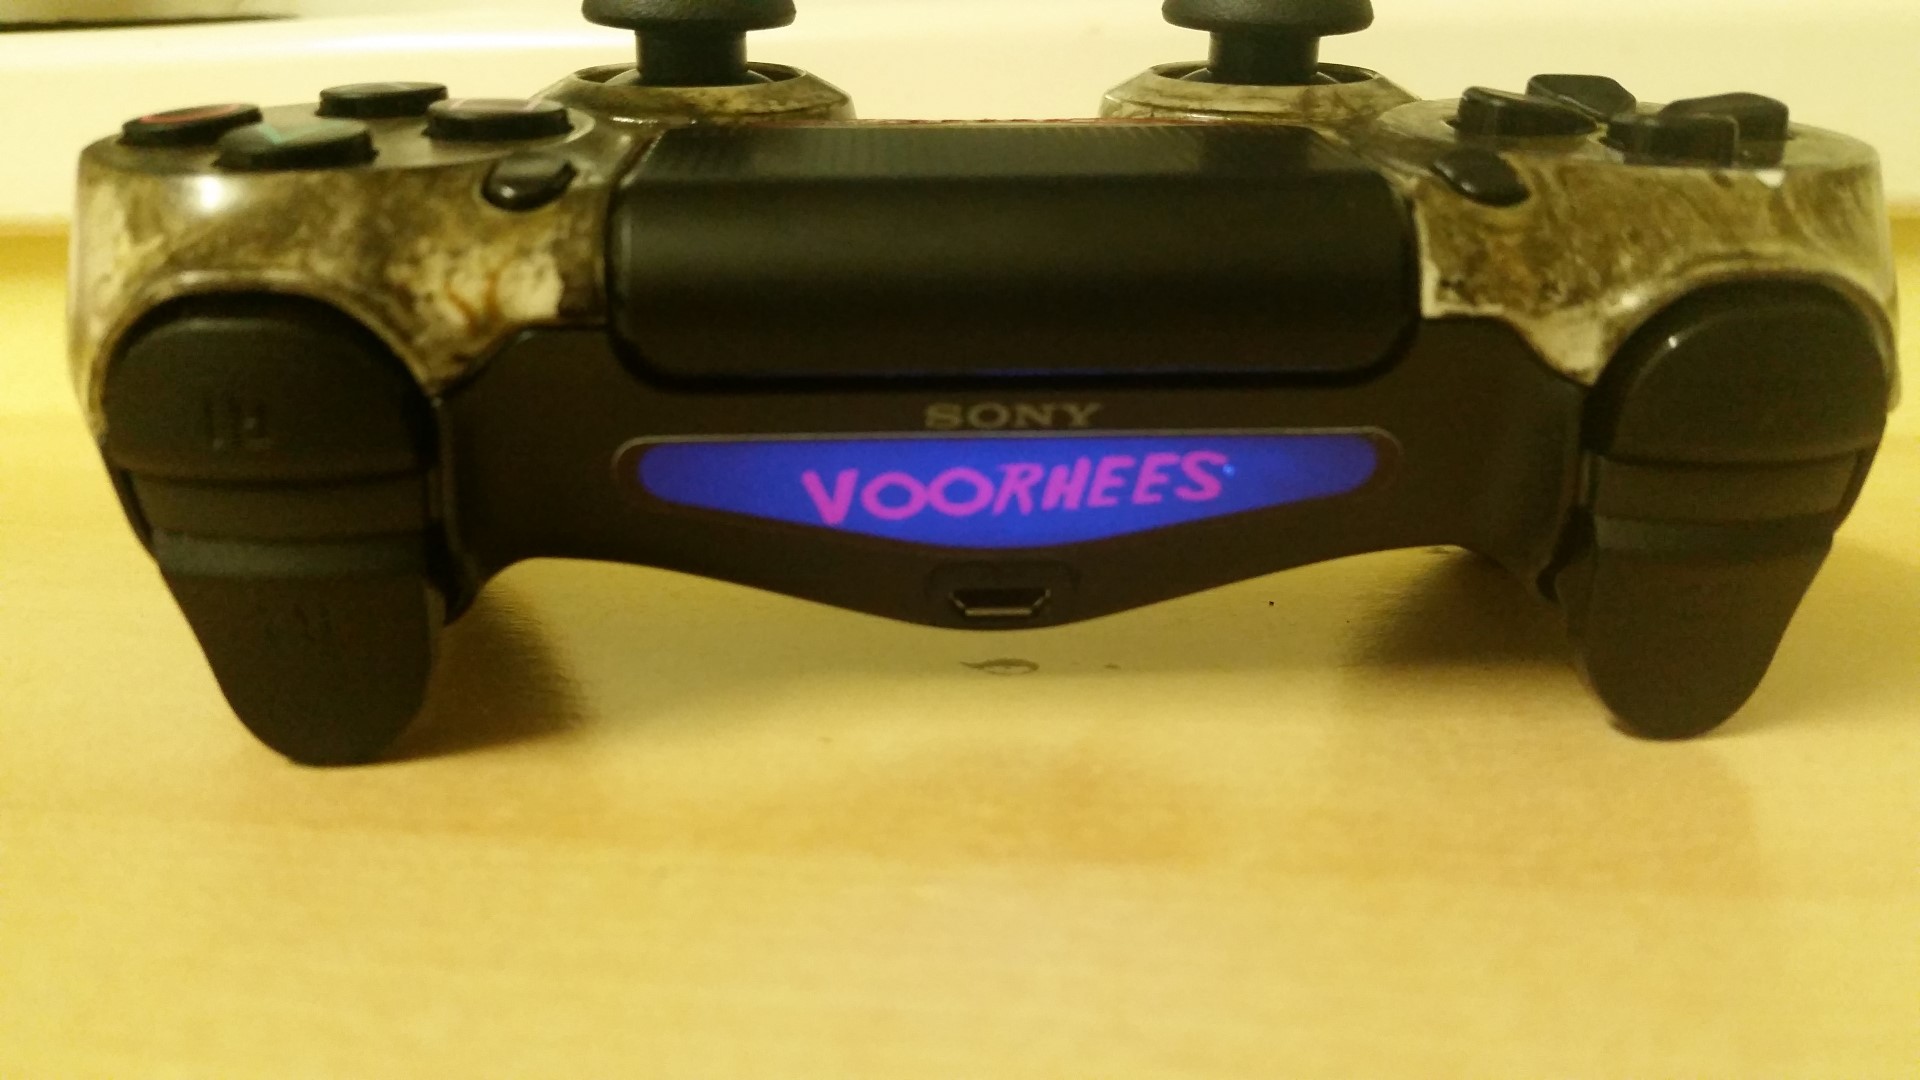 Custom PS4 Controller Jason Voorhees Friday the 13th Mod Sony 